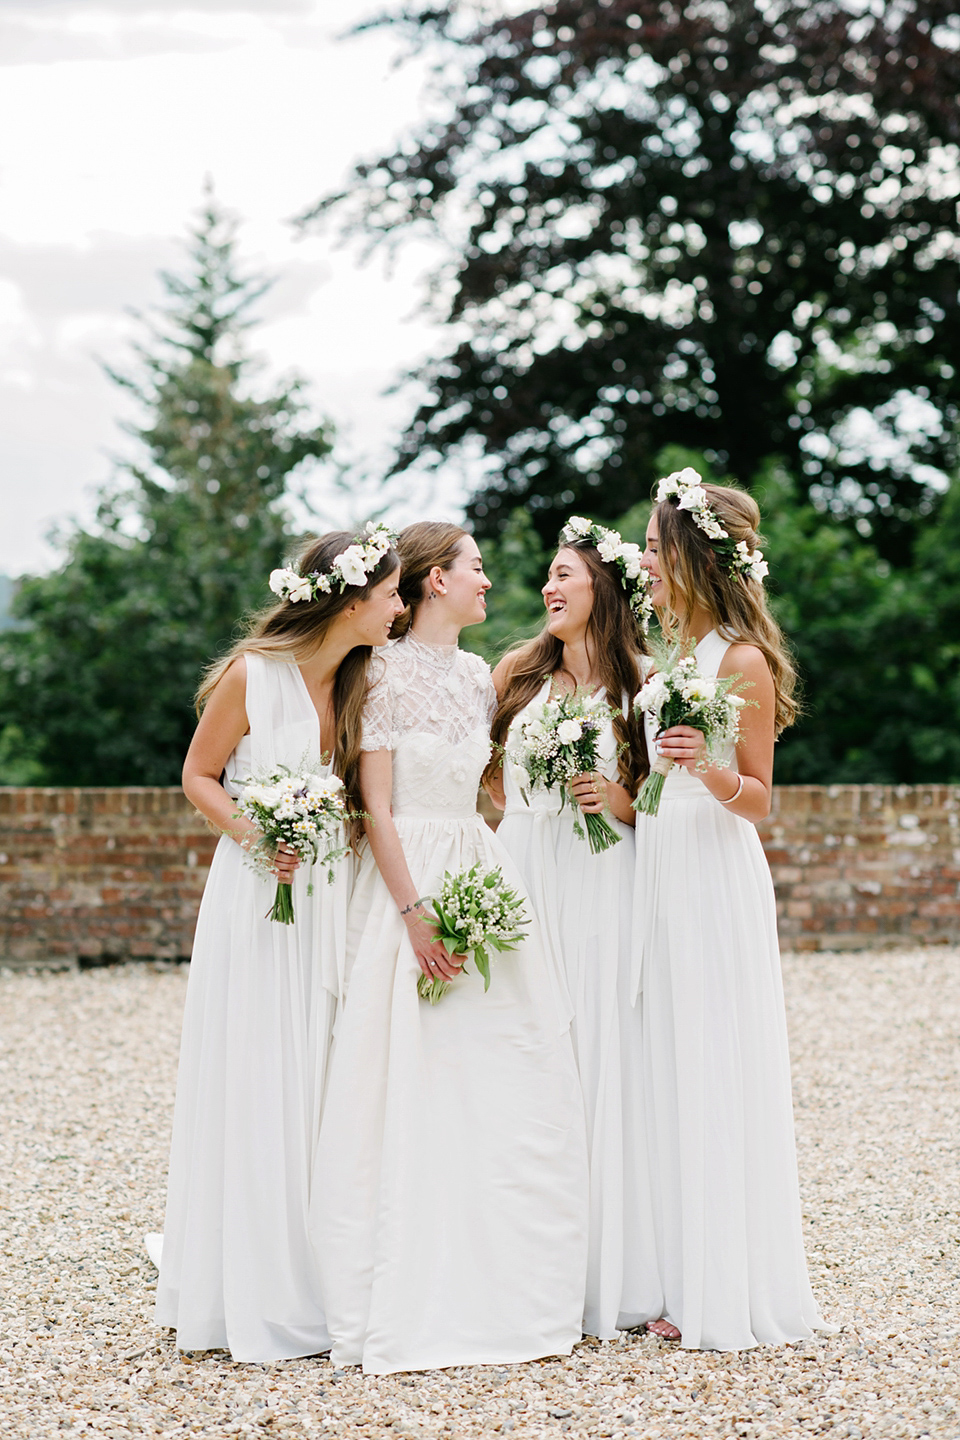 A Marchesa dress and Prada shoes for an elegant English country wedding at Farnham Castle. Photography by Dominique Bader.